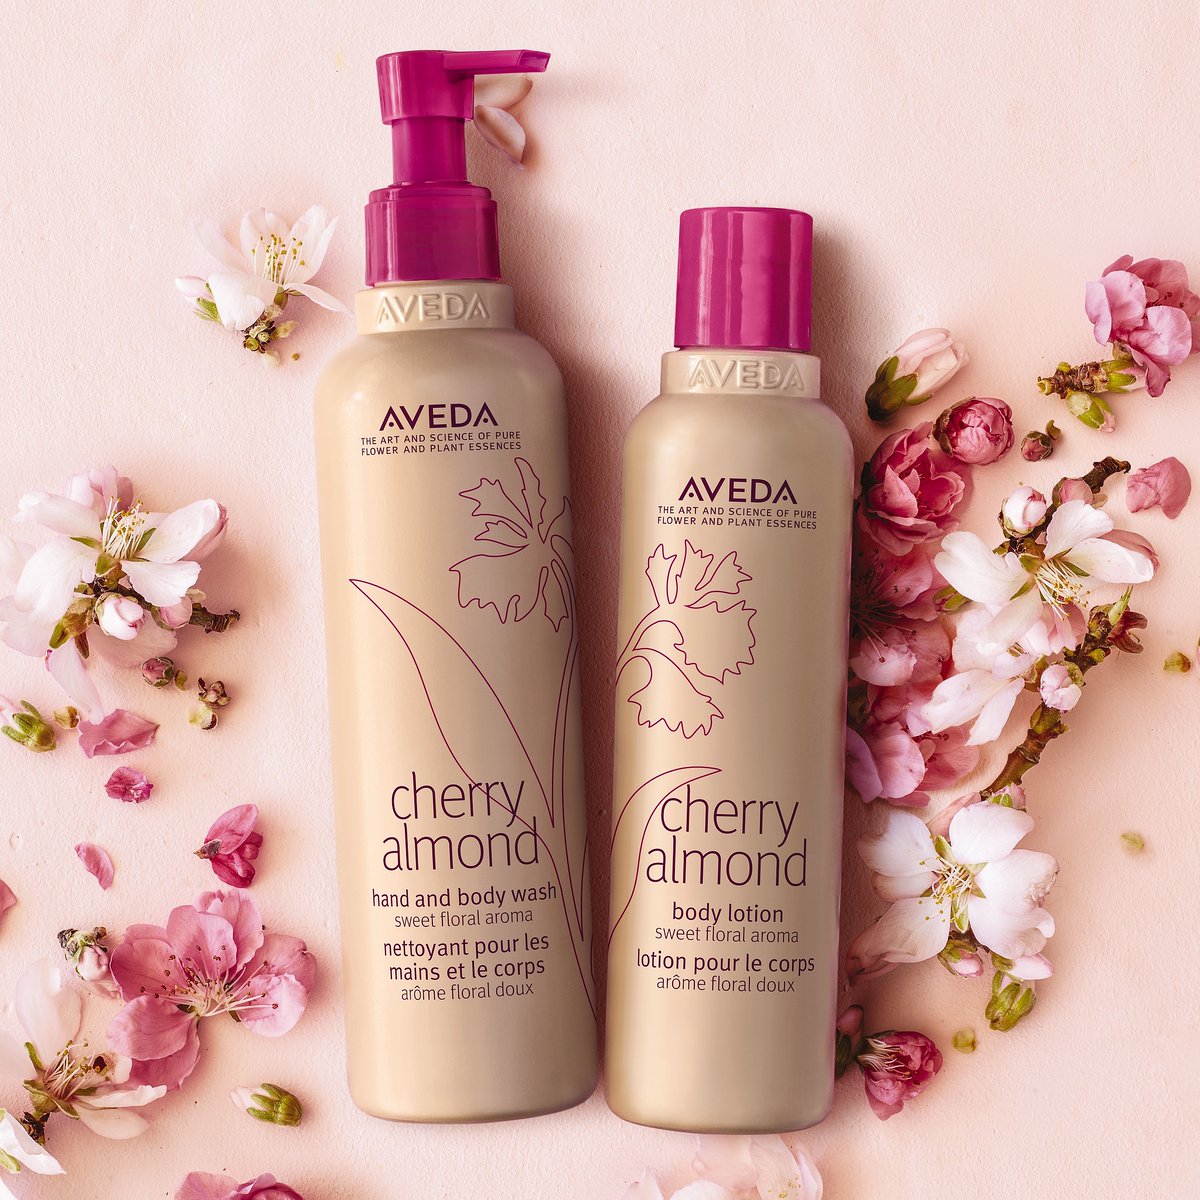 #SelfCareSunday Feel sweet and soft from head to toe with #CherryAlmond Body Lotion and Hand & Body Wash! #DOliverSalons #SmellsLikeAveda #HoustonSalon #Aveda